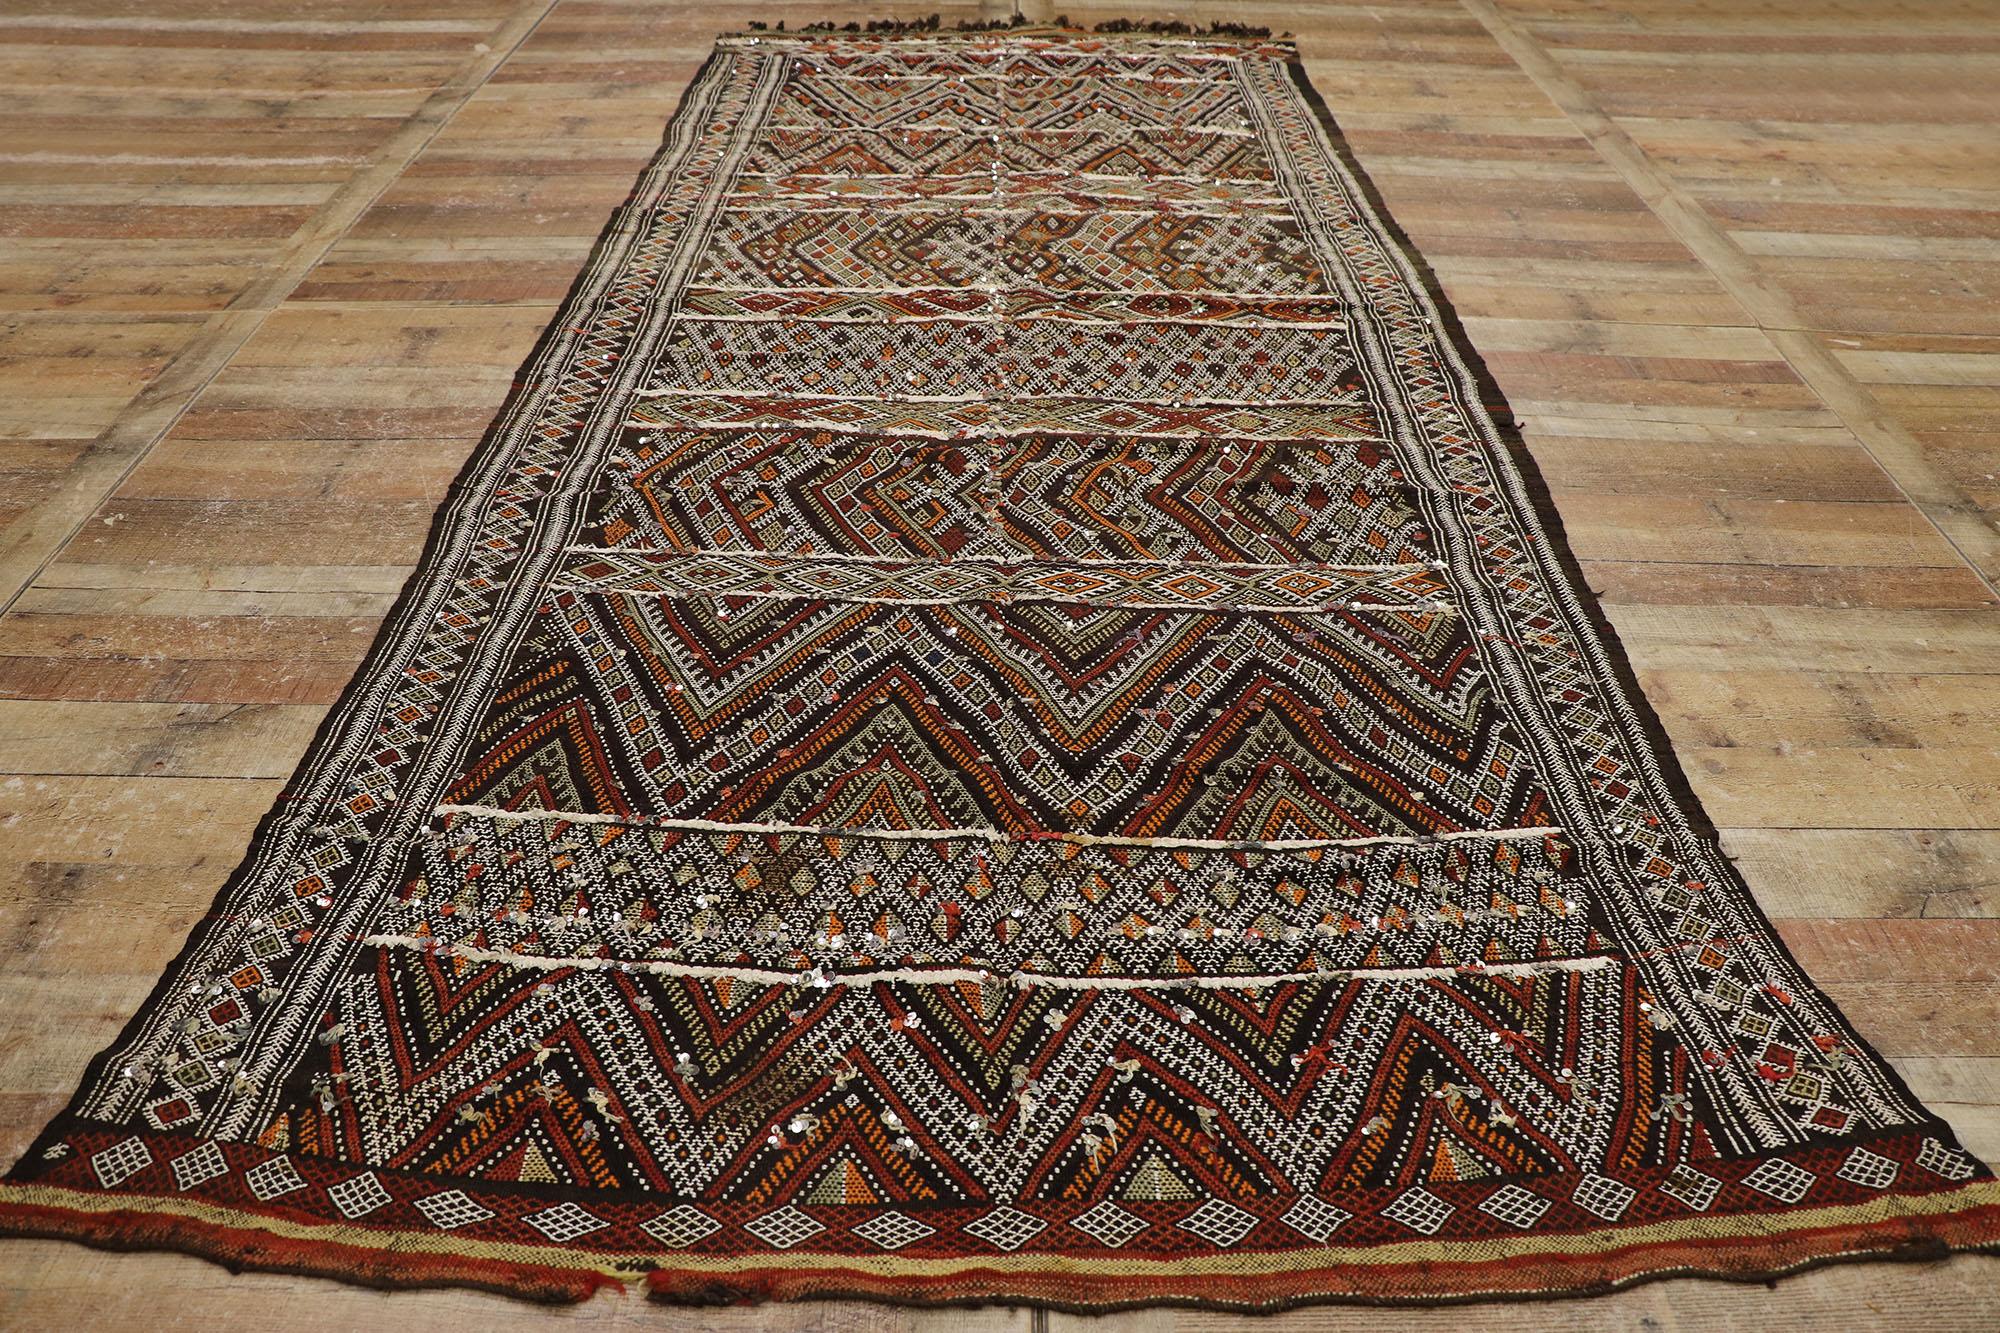 Vintage Zemmour Moroccan Kilim Runner with Sequins and Tribal Boho Chic Style For Sale 2